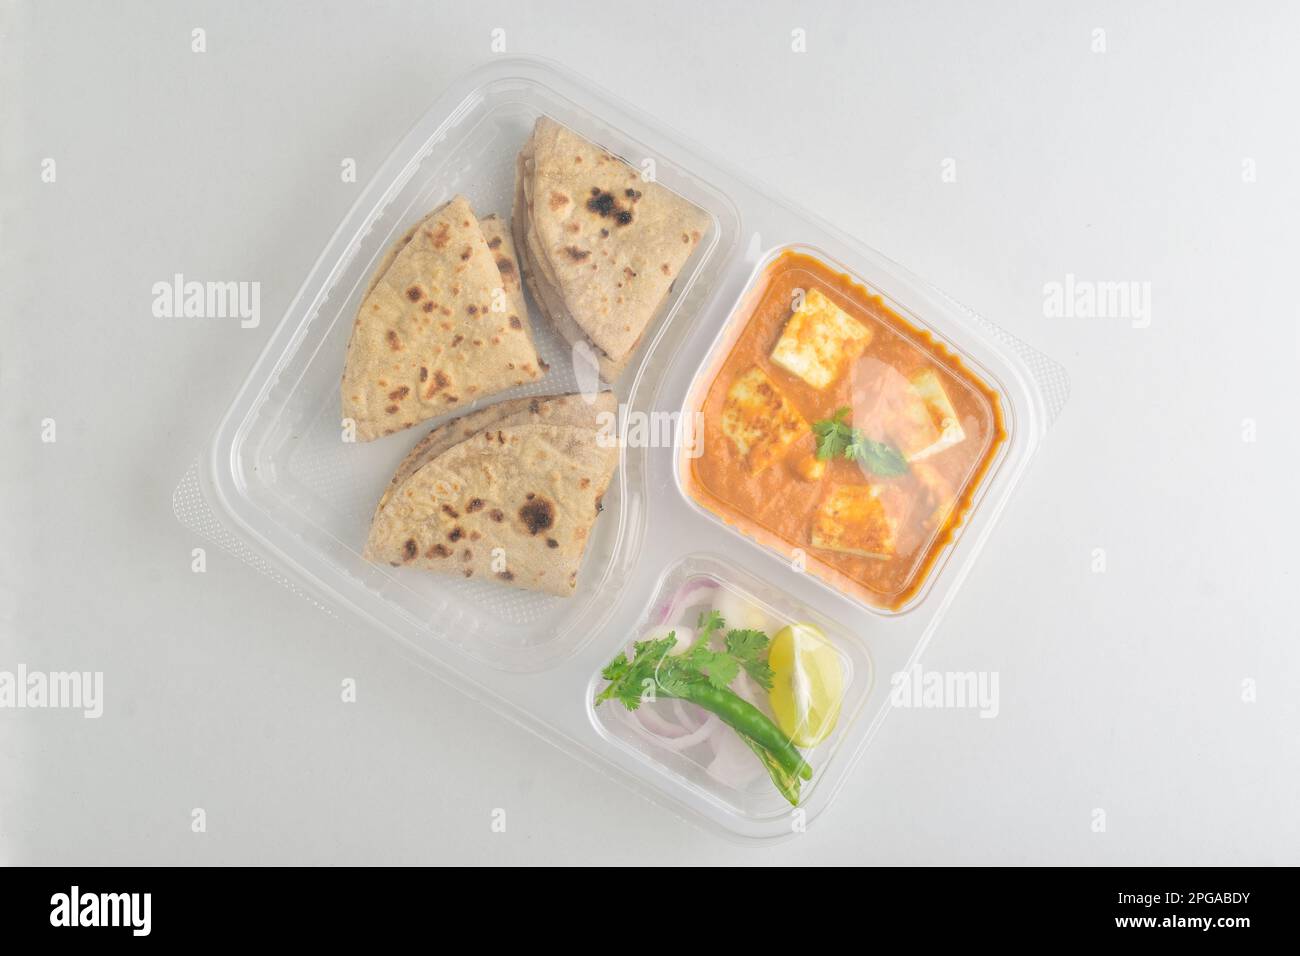 Packed indian meal isolated on white background, shahi paneer with tawa roti and salad in disposable plates Stock Photo